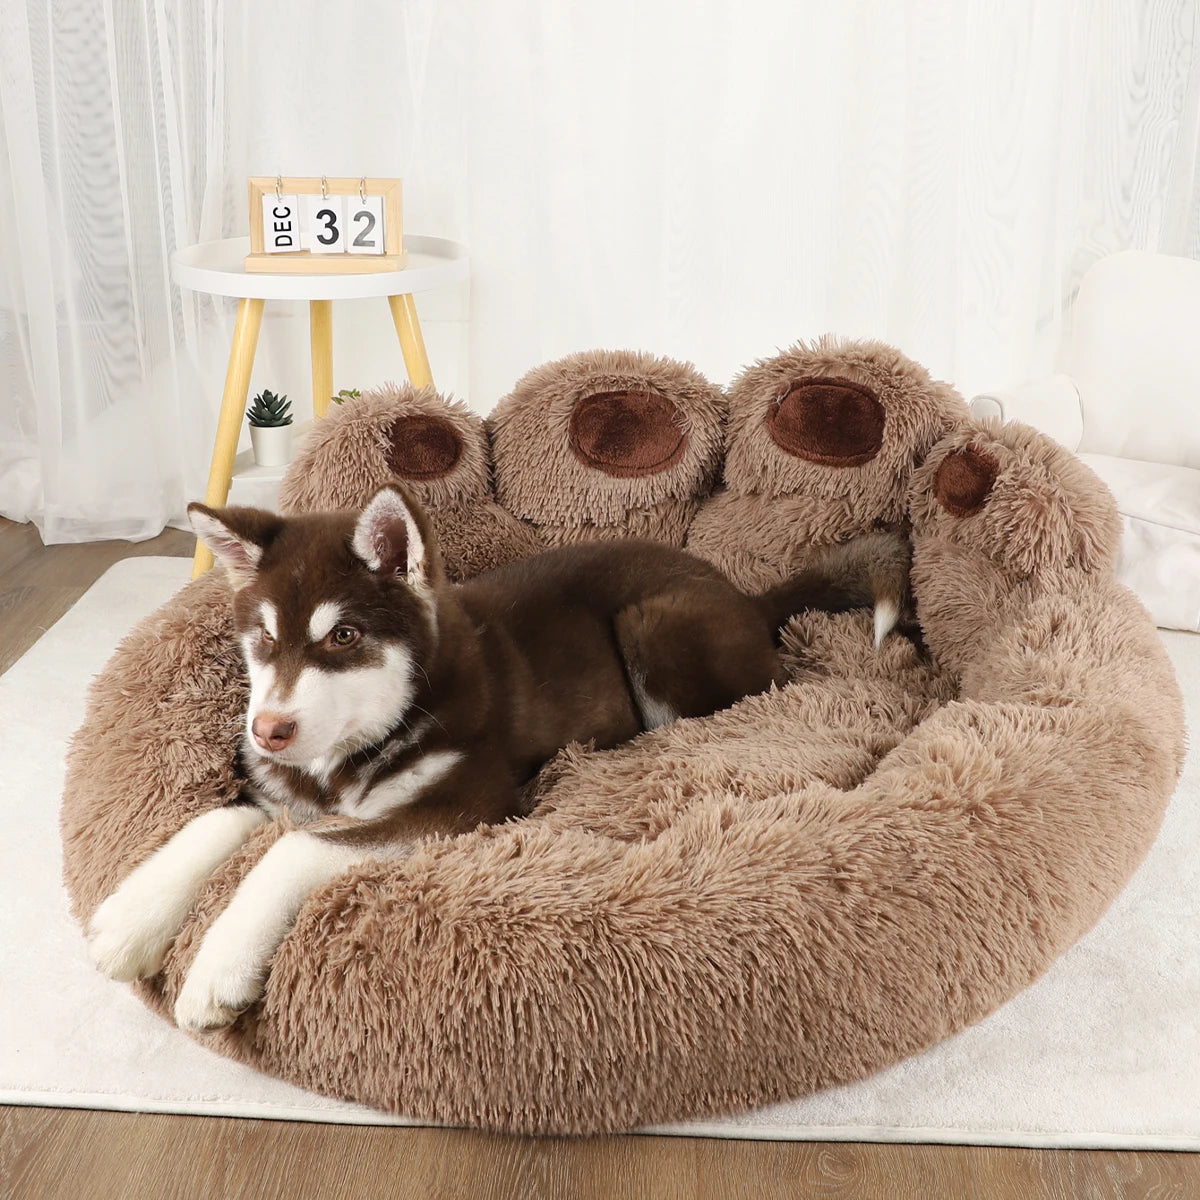 Fluffy Dog Bed for Large and Small Dogs - Comfortable Sofa Baskets, Kennel Mat, and Puppy Cats Cozy Basket Blanket